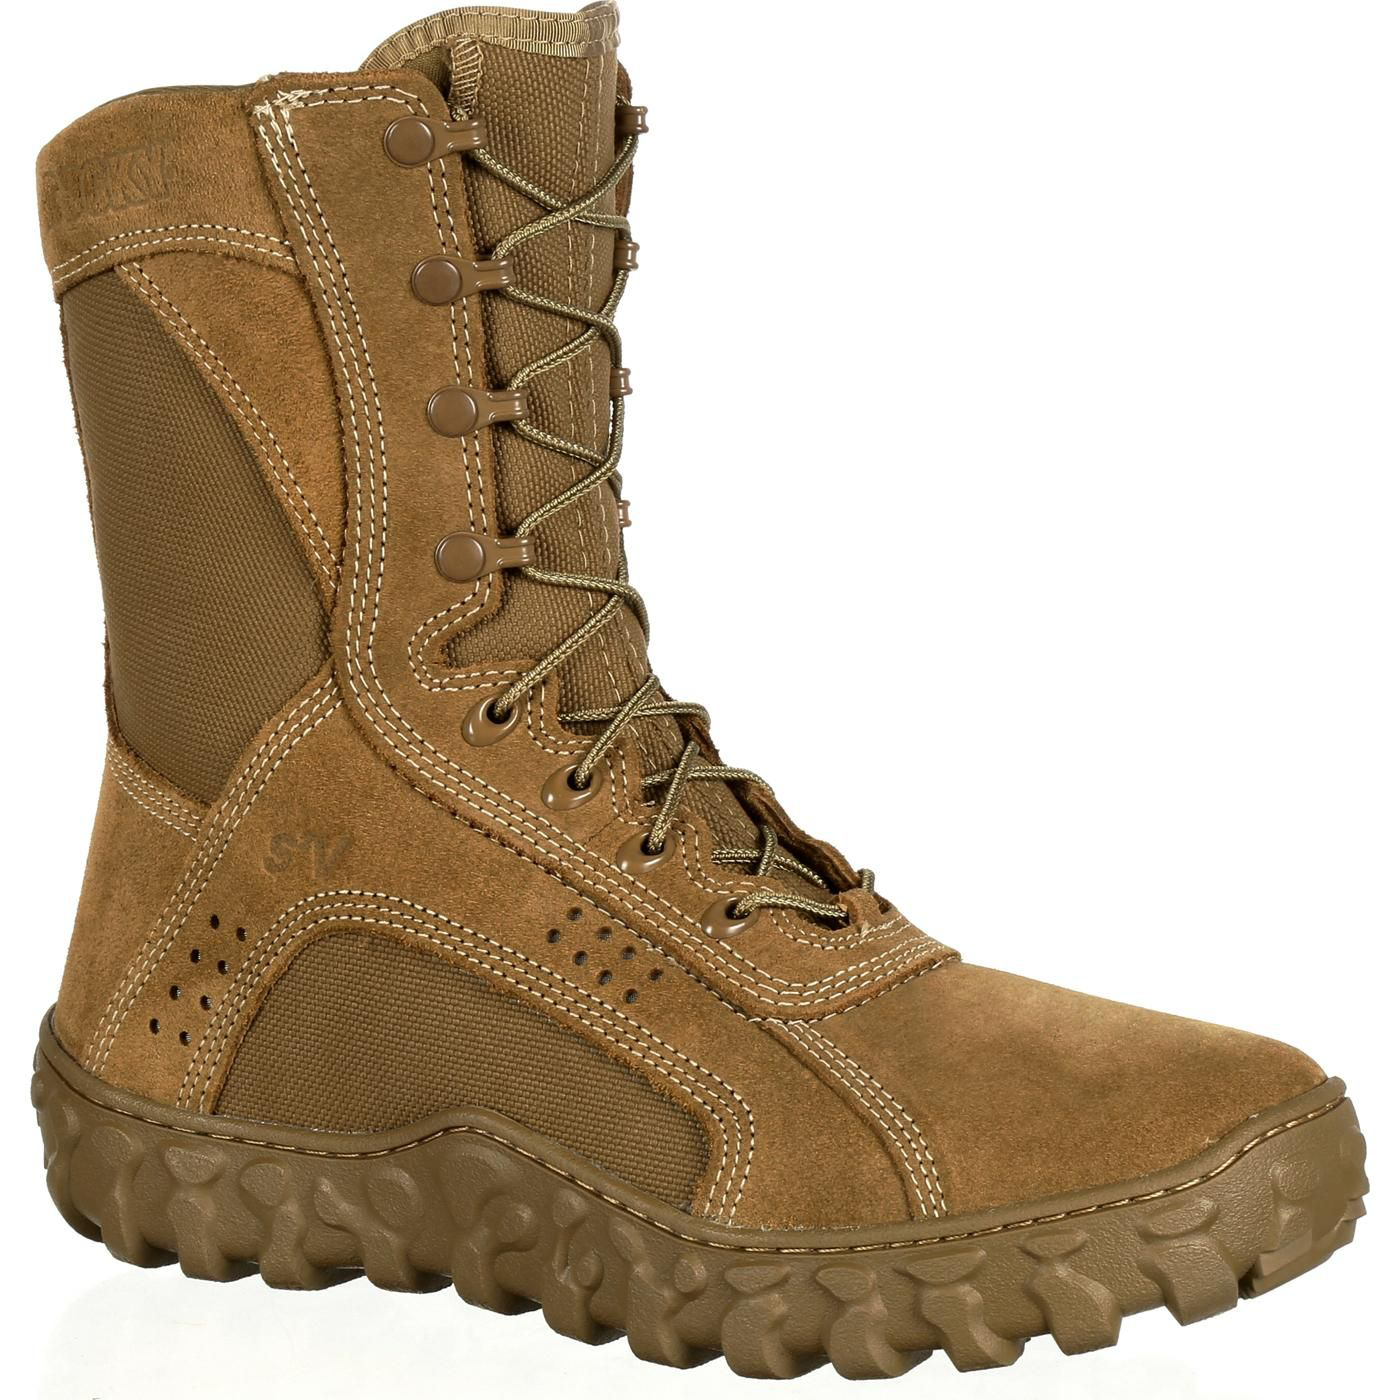 Rocky S2V Tactical Military Boots for Men - Coyote Brown - 7.5M